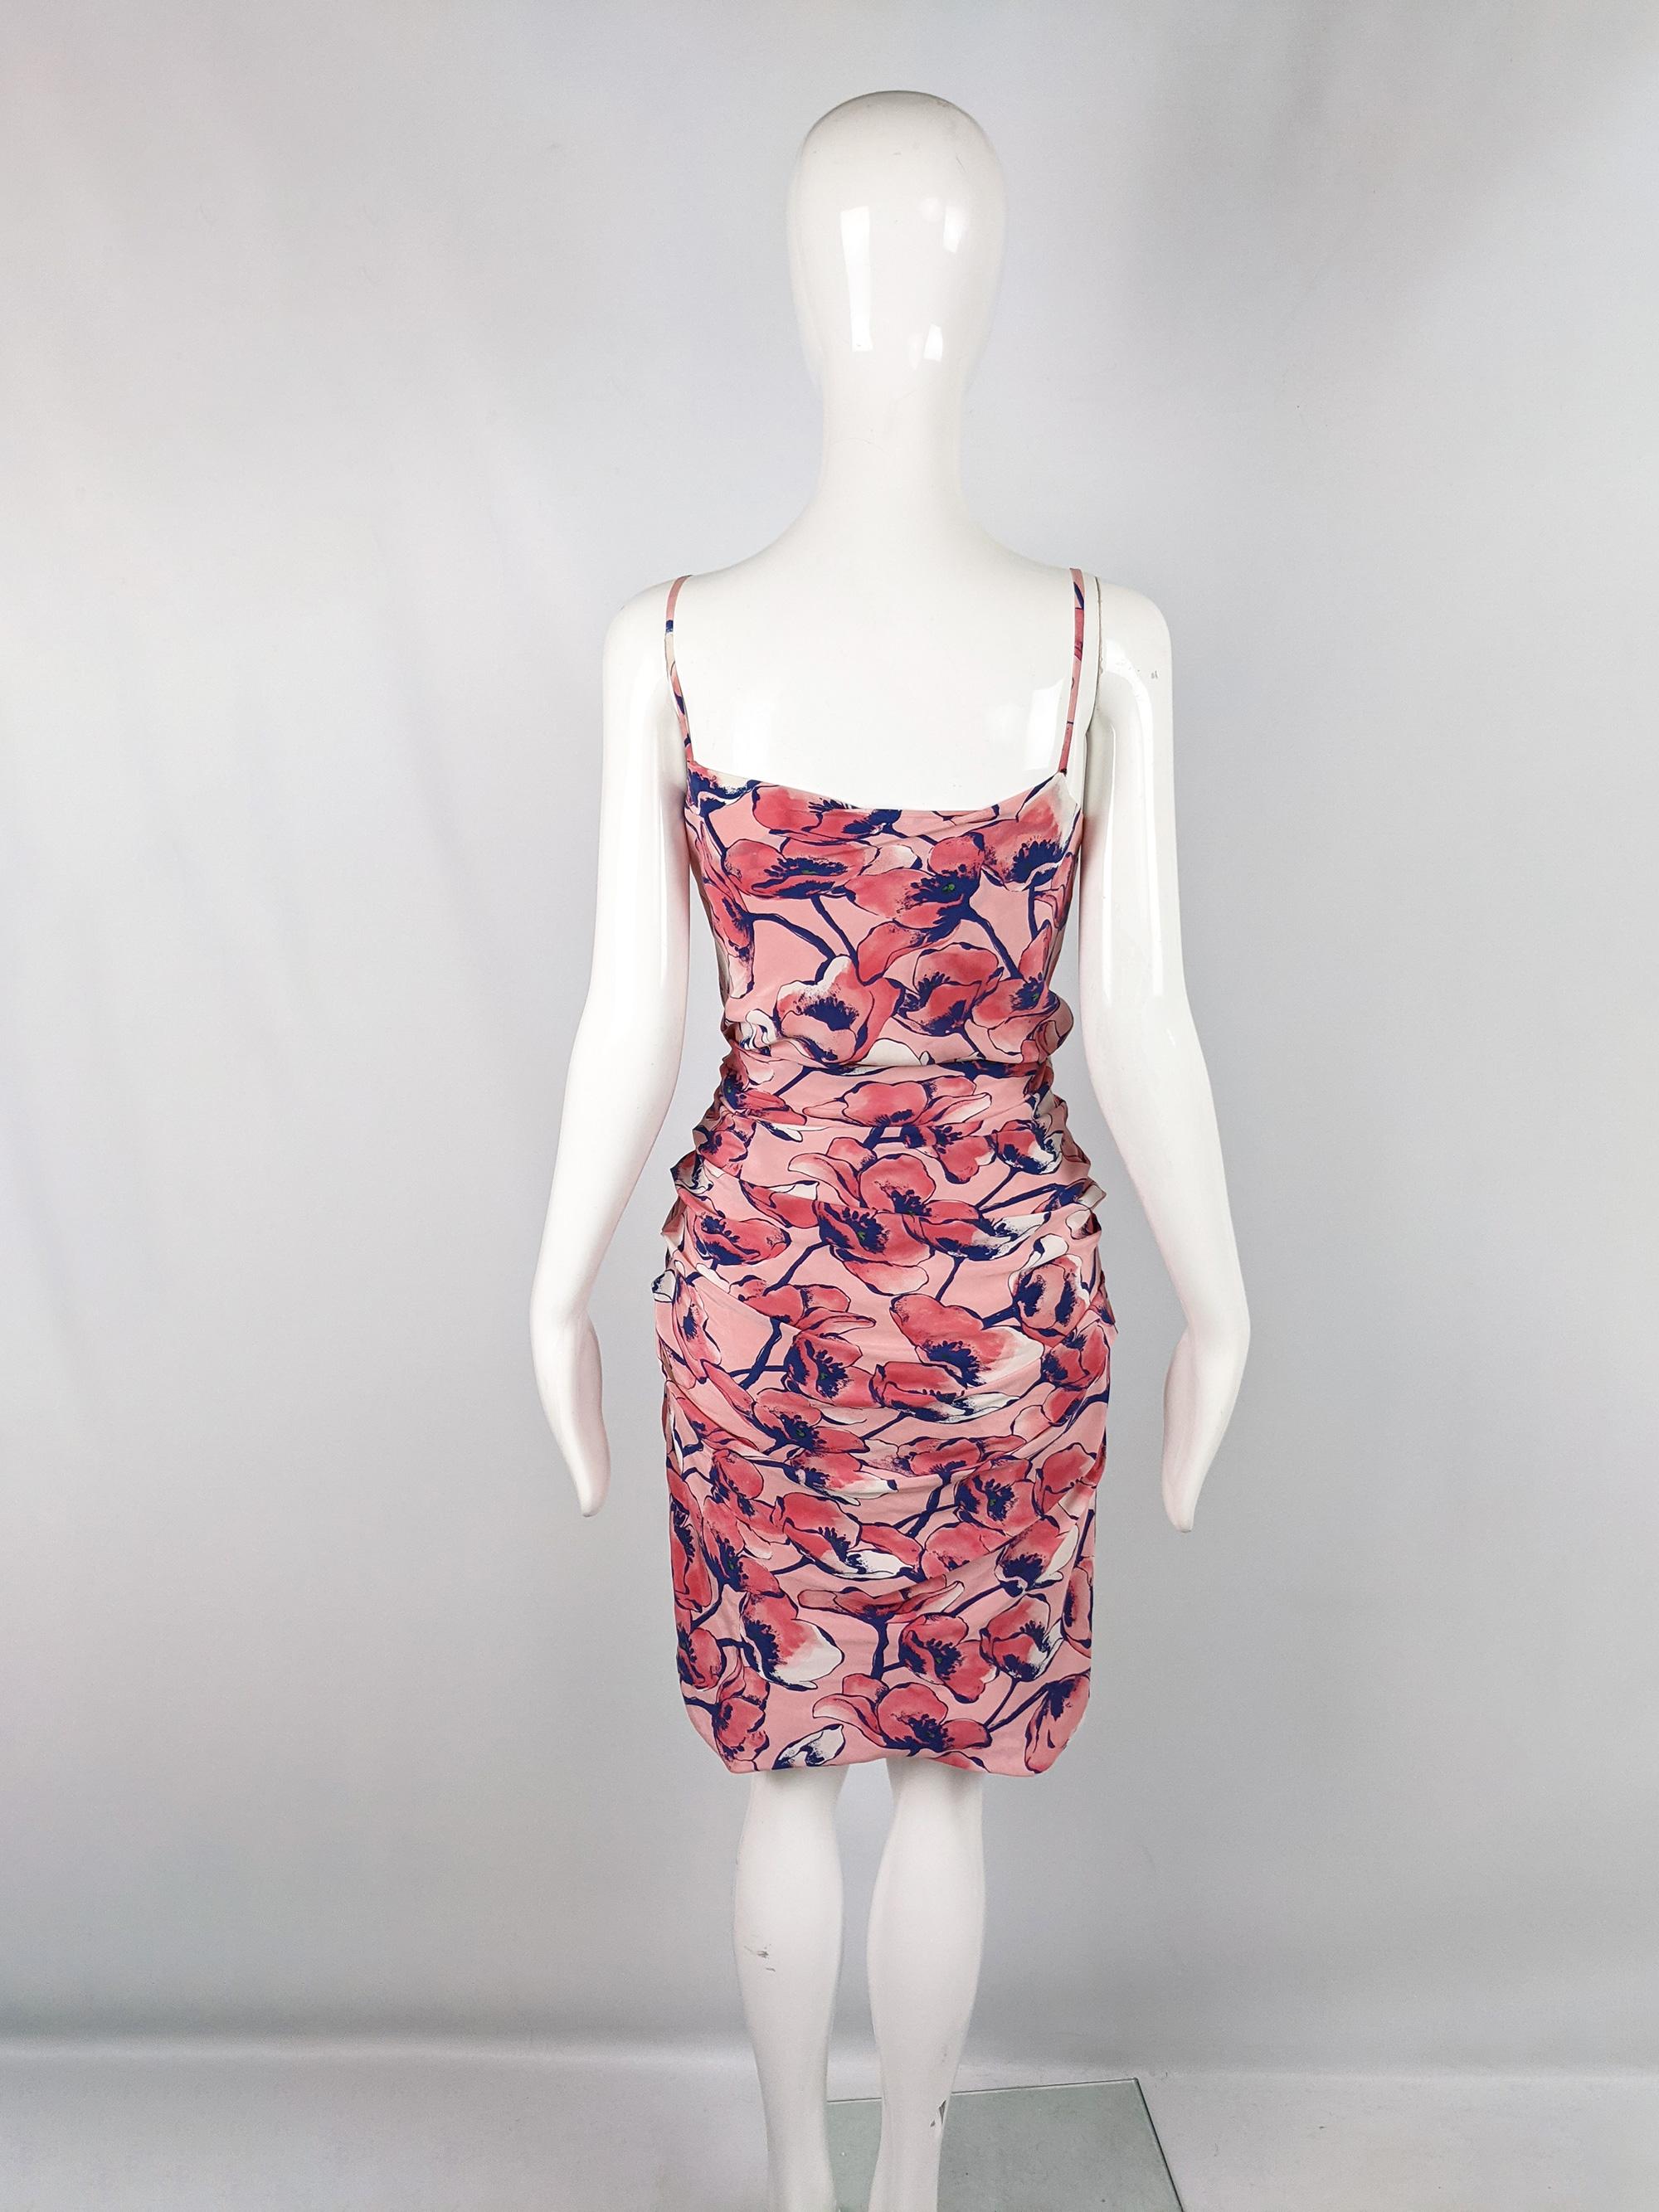 Moschino Pink Silk Vintage Ruched Flower Print Sleeveless Party Dress, 2000s  For Sale 1